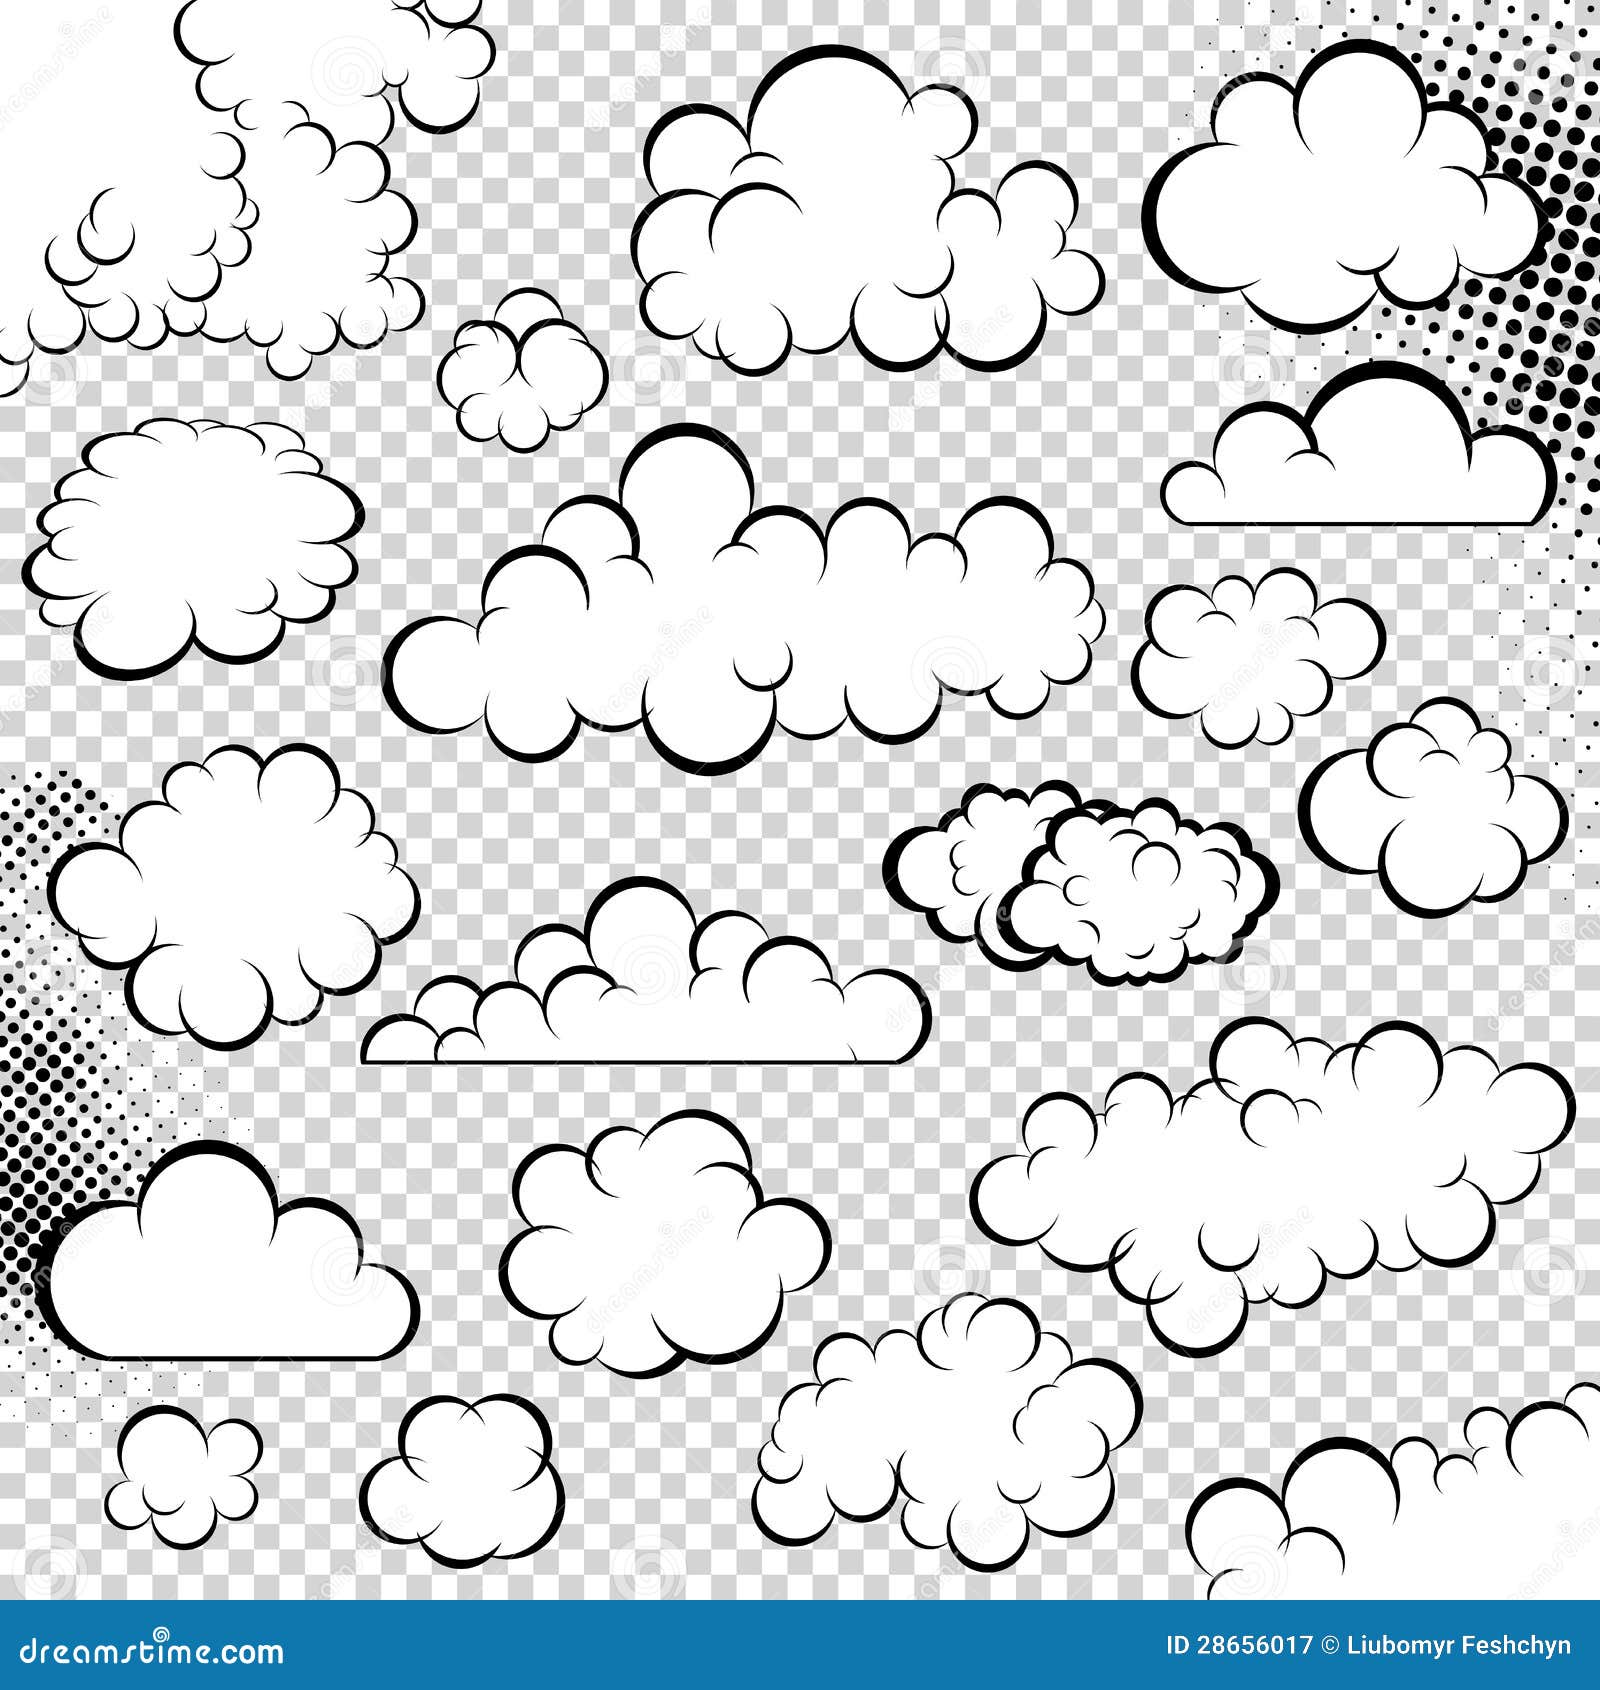 Vector clouds collection stock vector. Illustration of design - 28656017